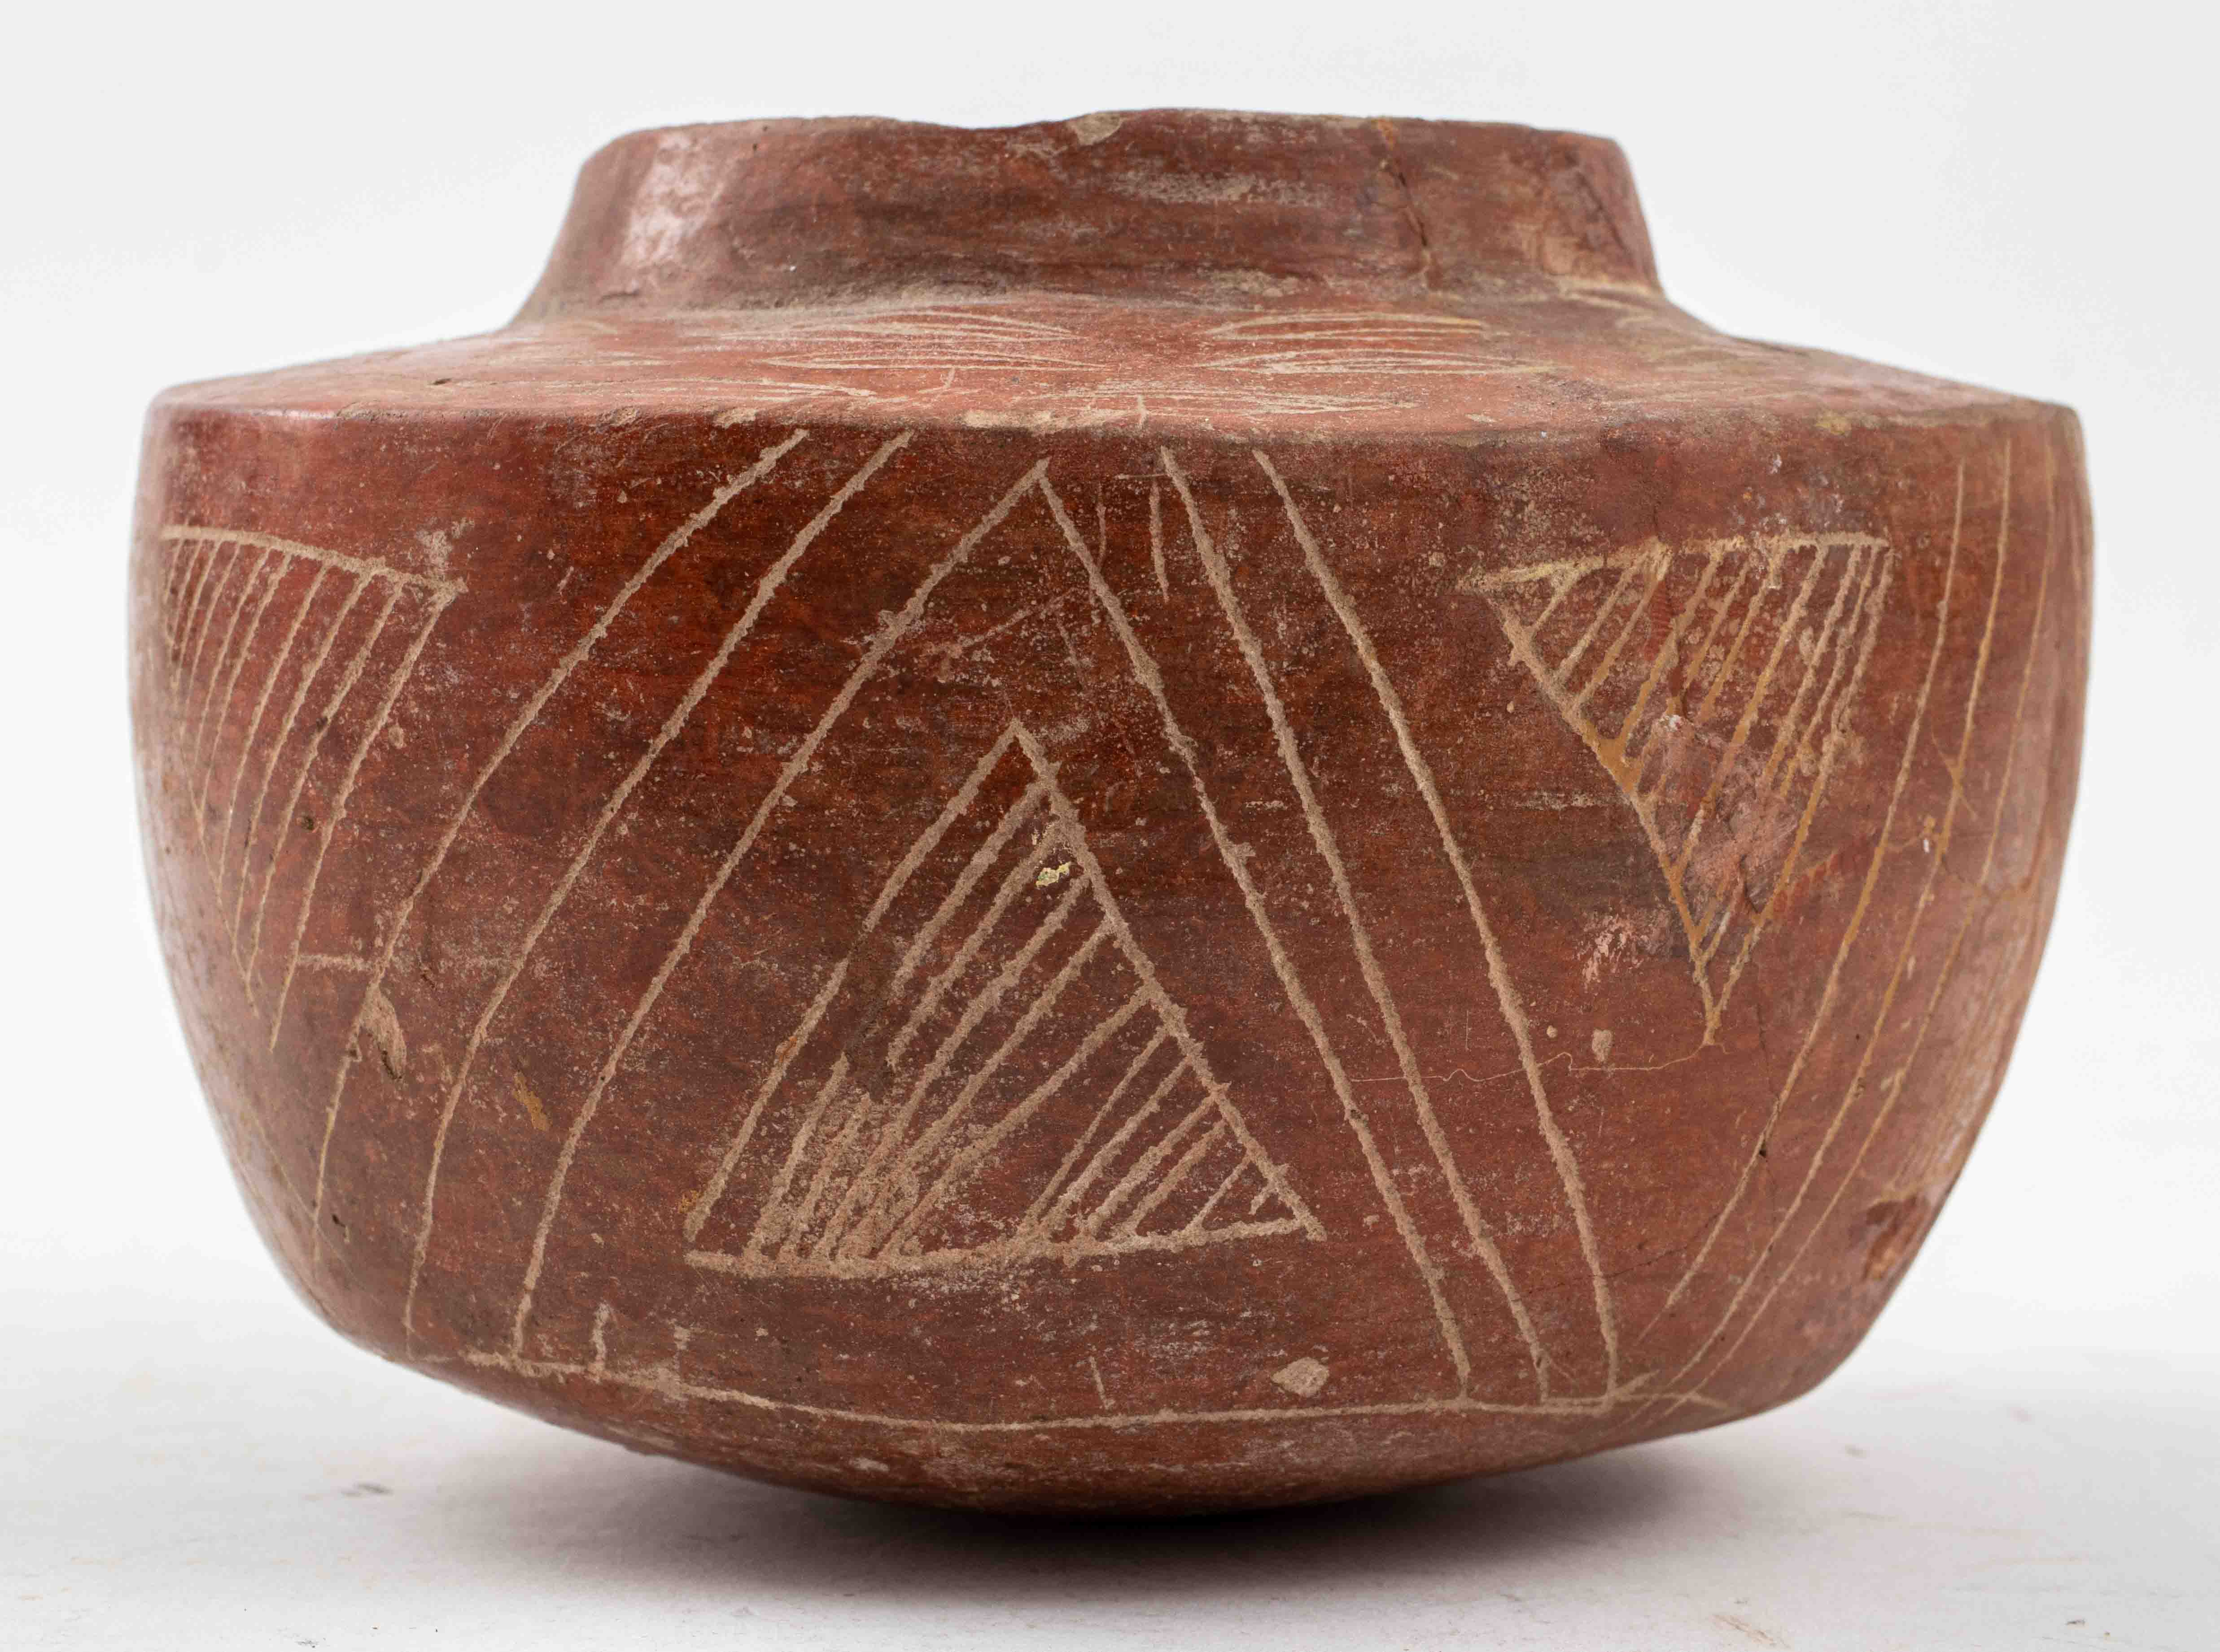 PRE COLUMBIAN INCISED REDWARE BOWL 2d1bef